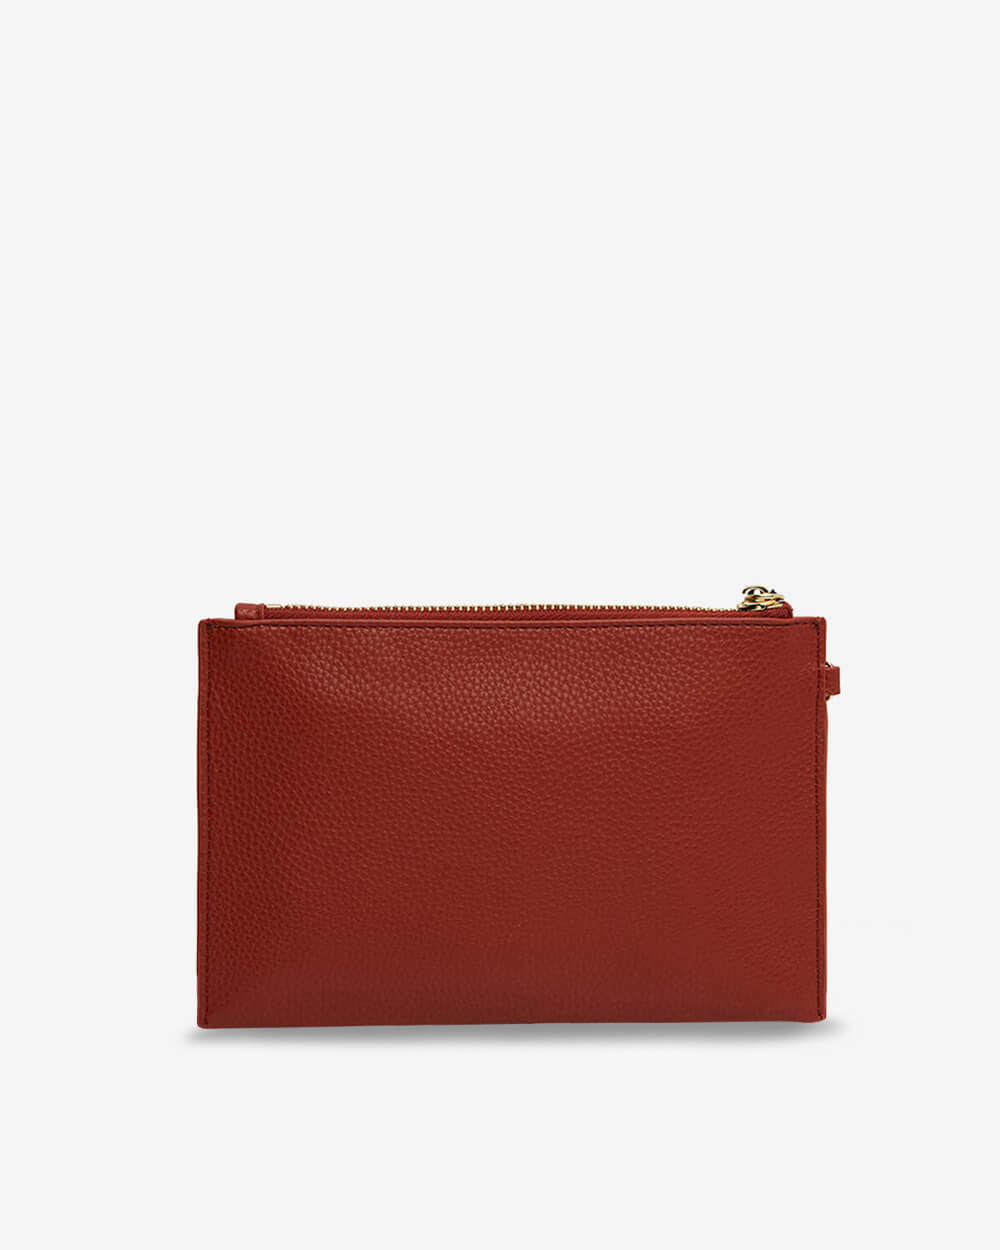 Violet Ray Stitched Purse - Women's Accessories in Rust | Buckle